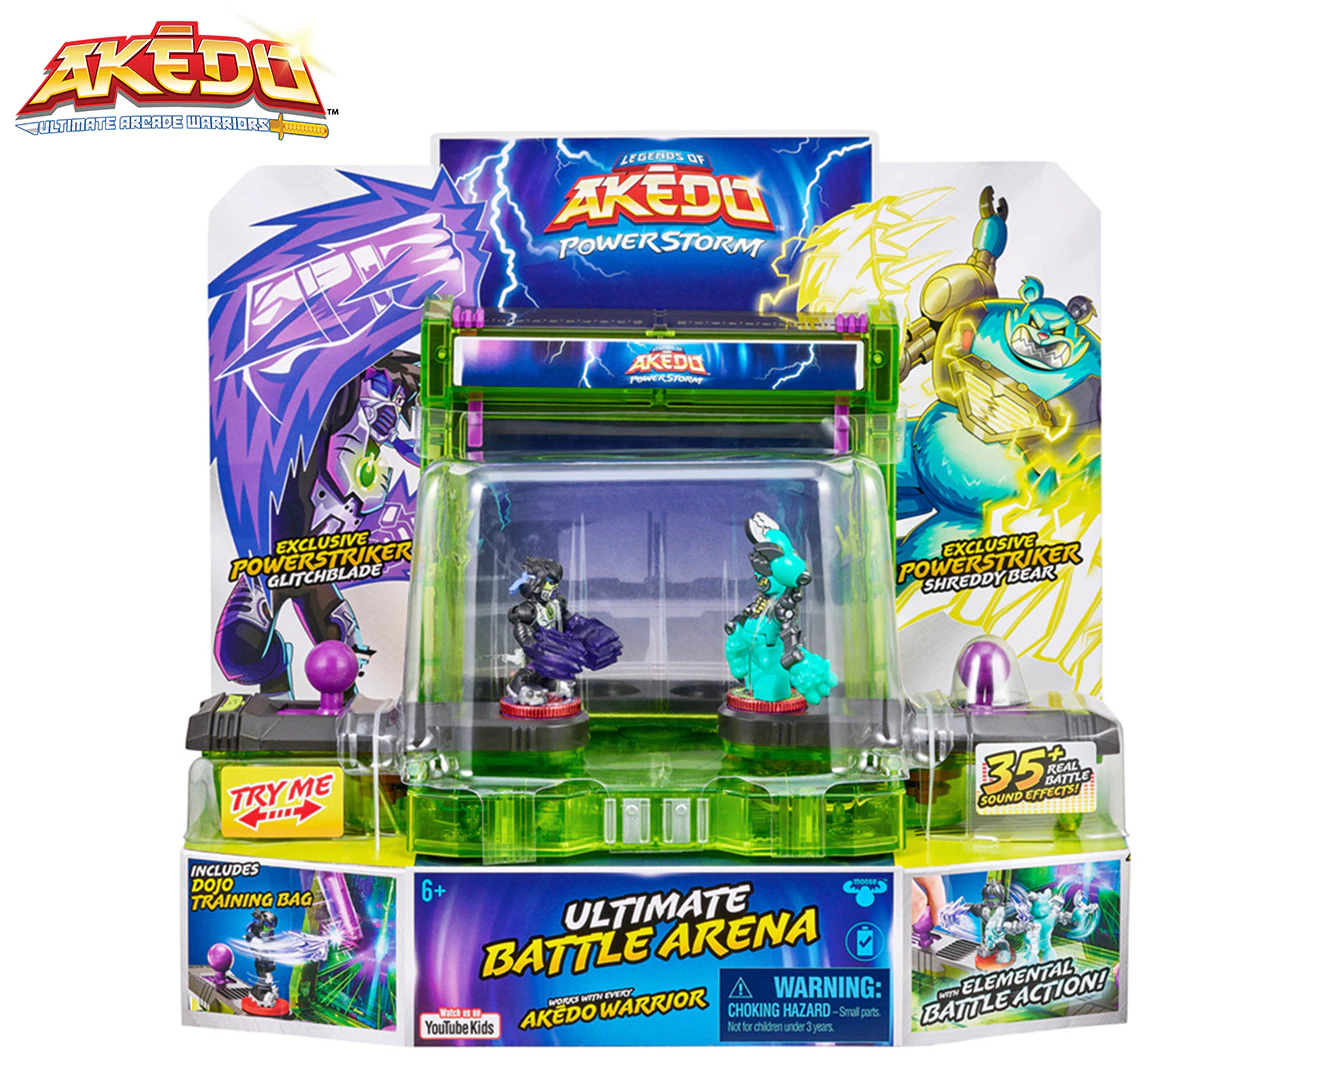 Legends of Akedo Beast Strike Serpent Fury Arena, Exclusive at